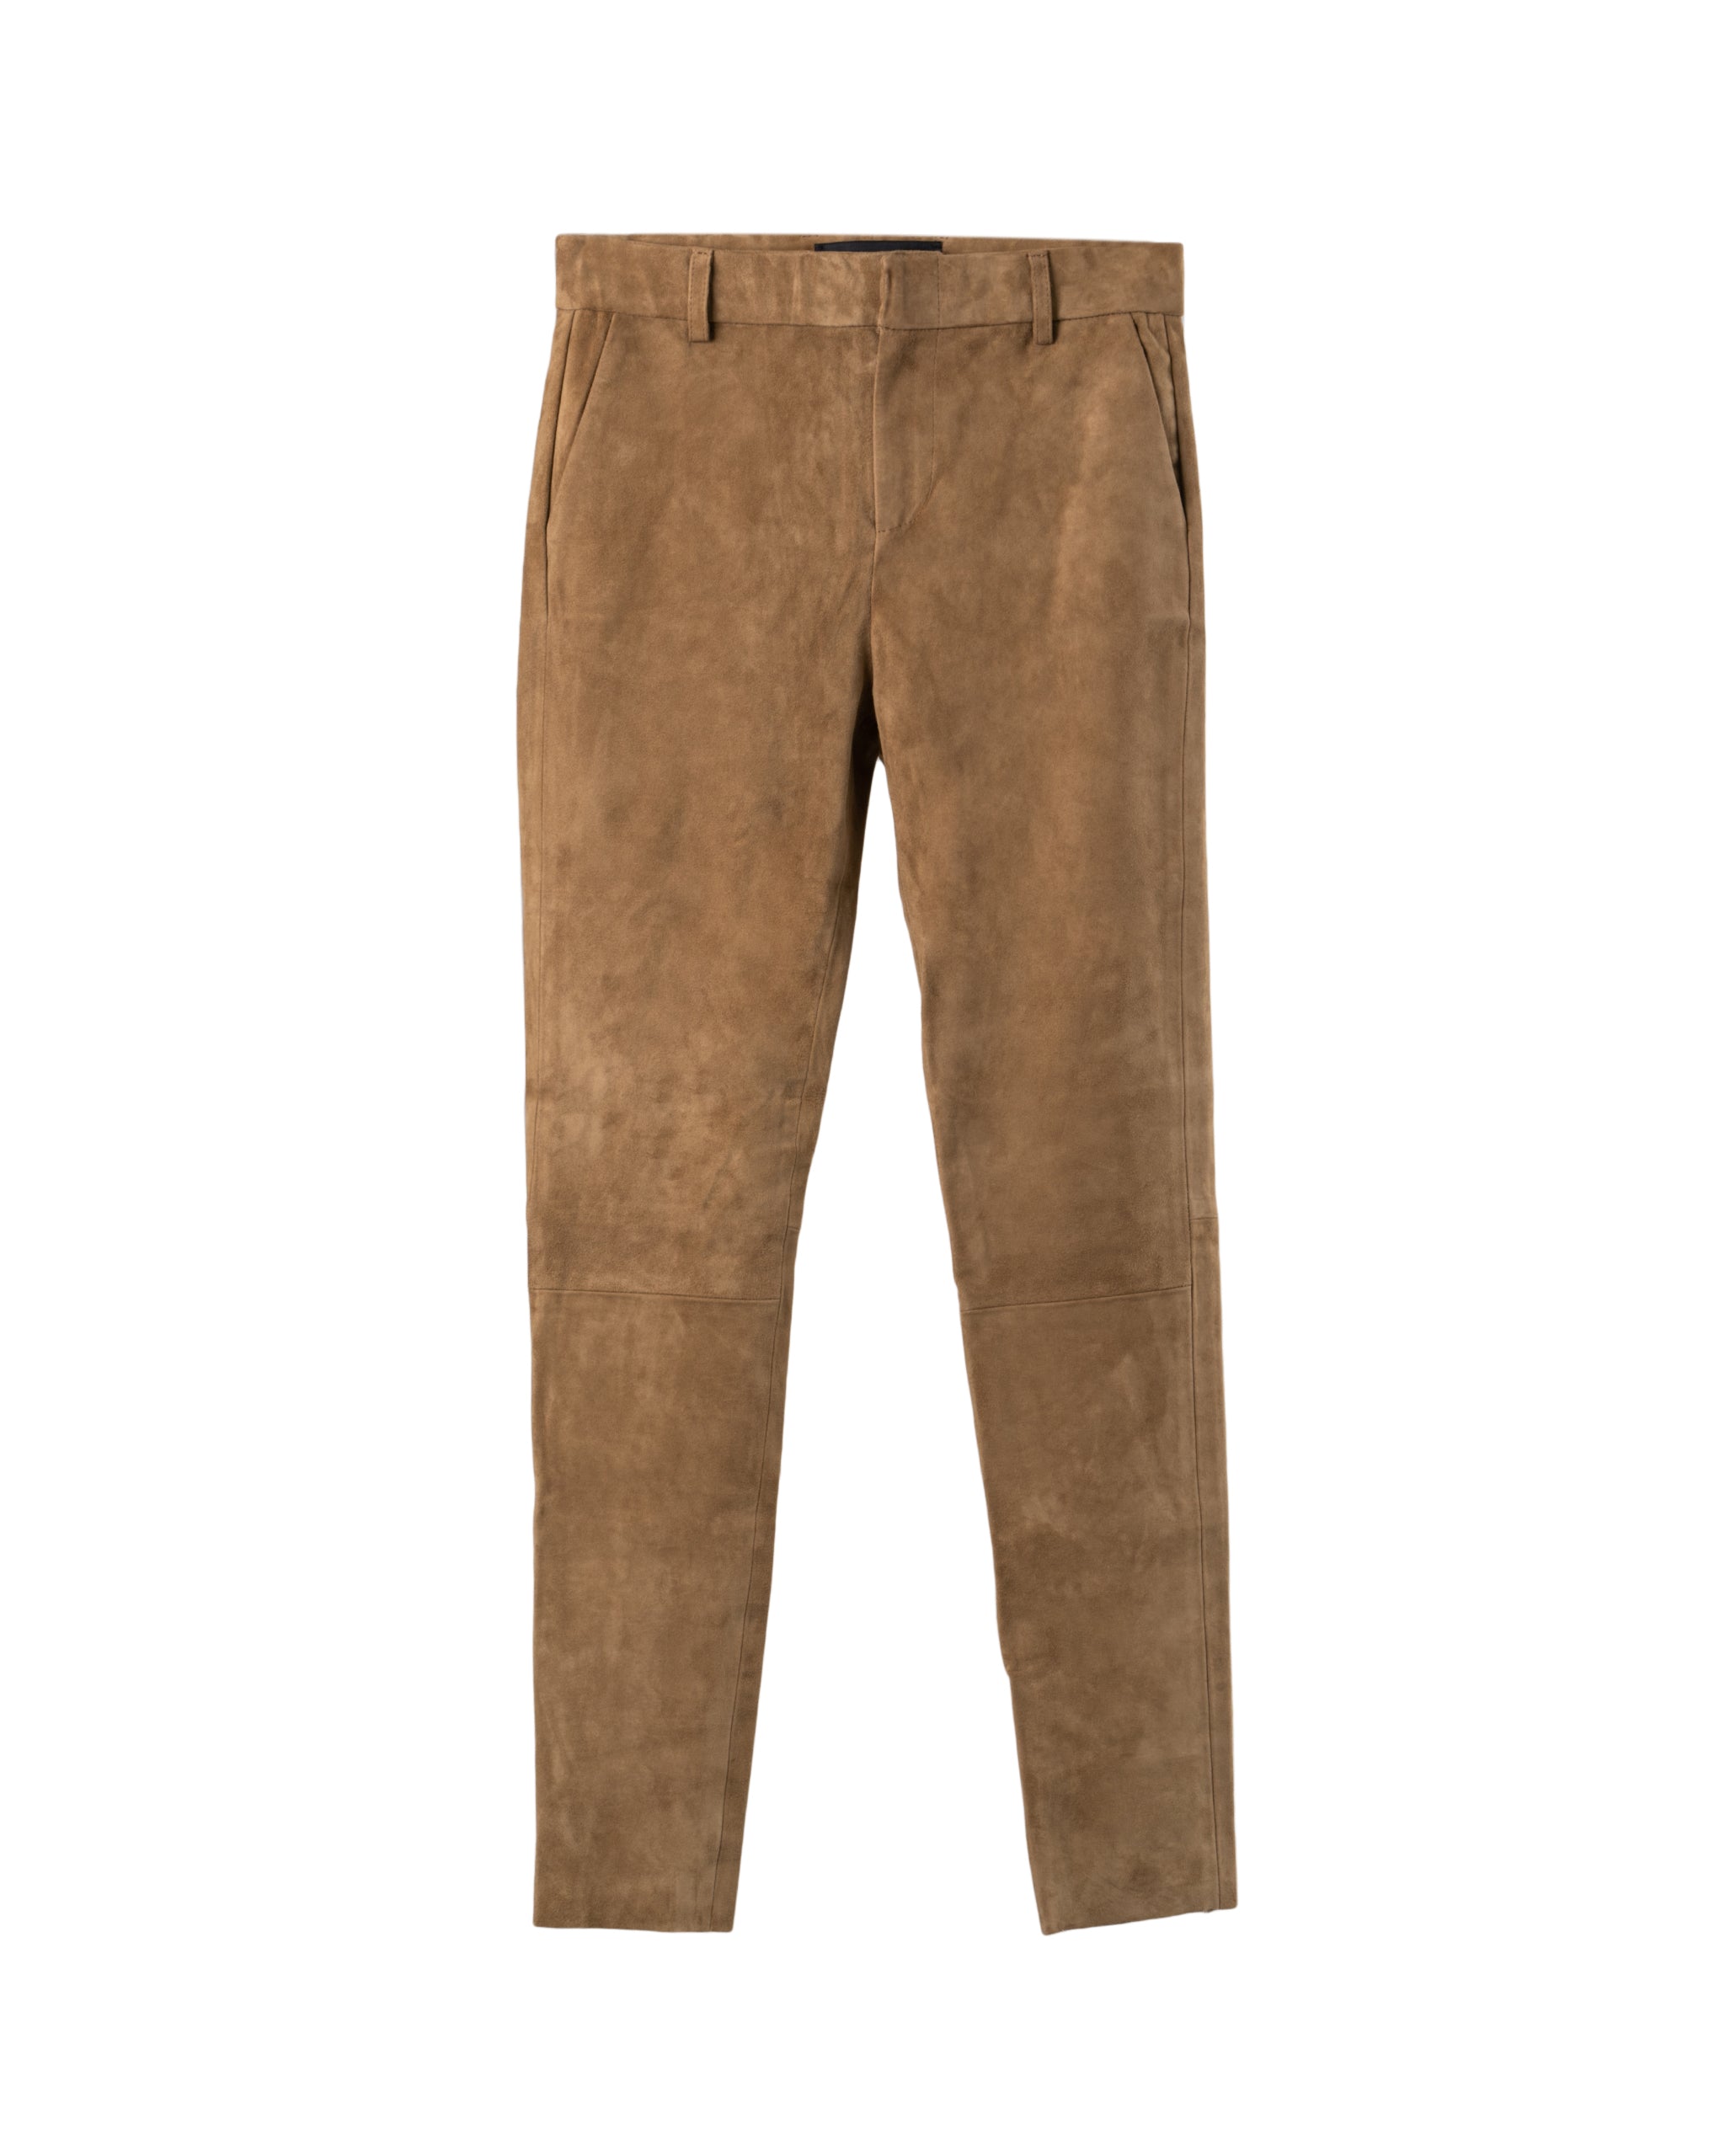 SUEDE STRETCH LEATHER CHINO